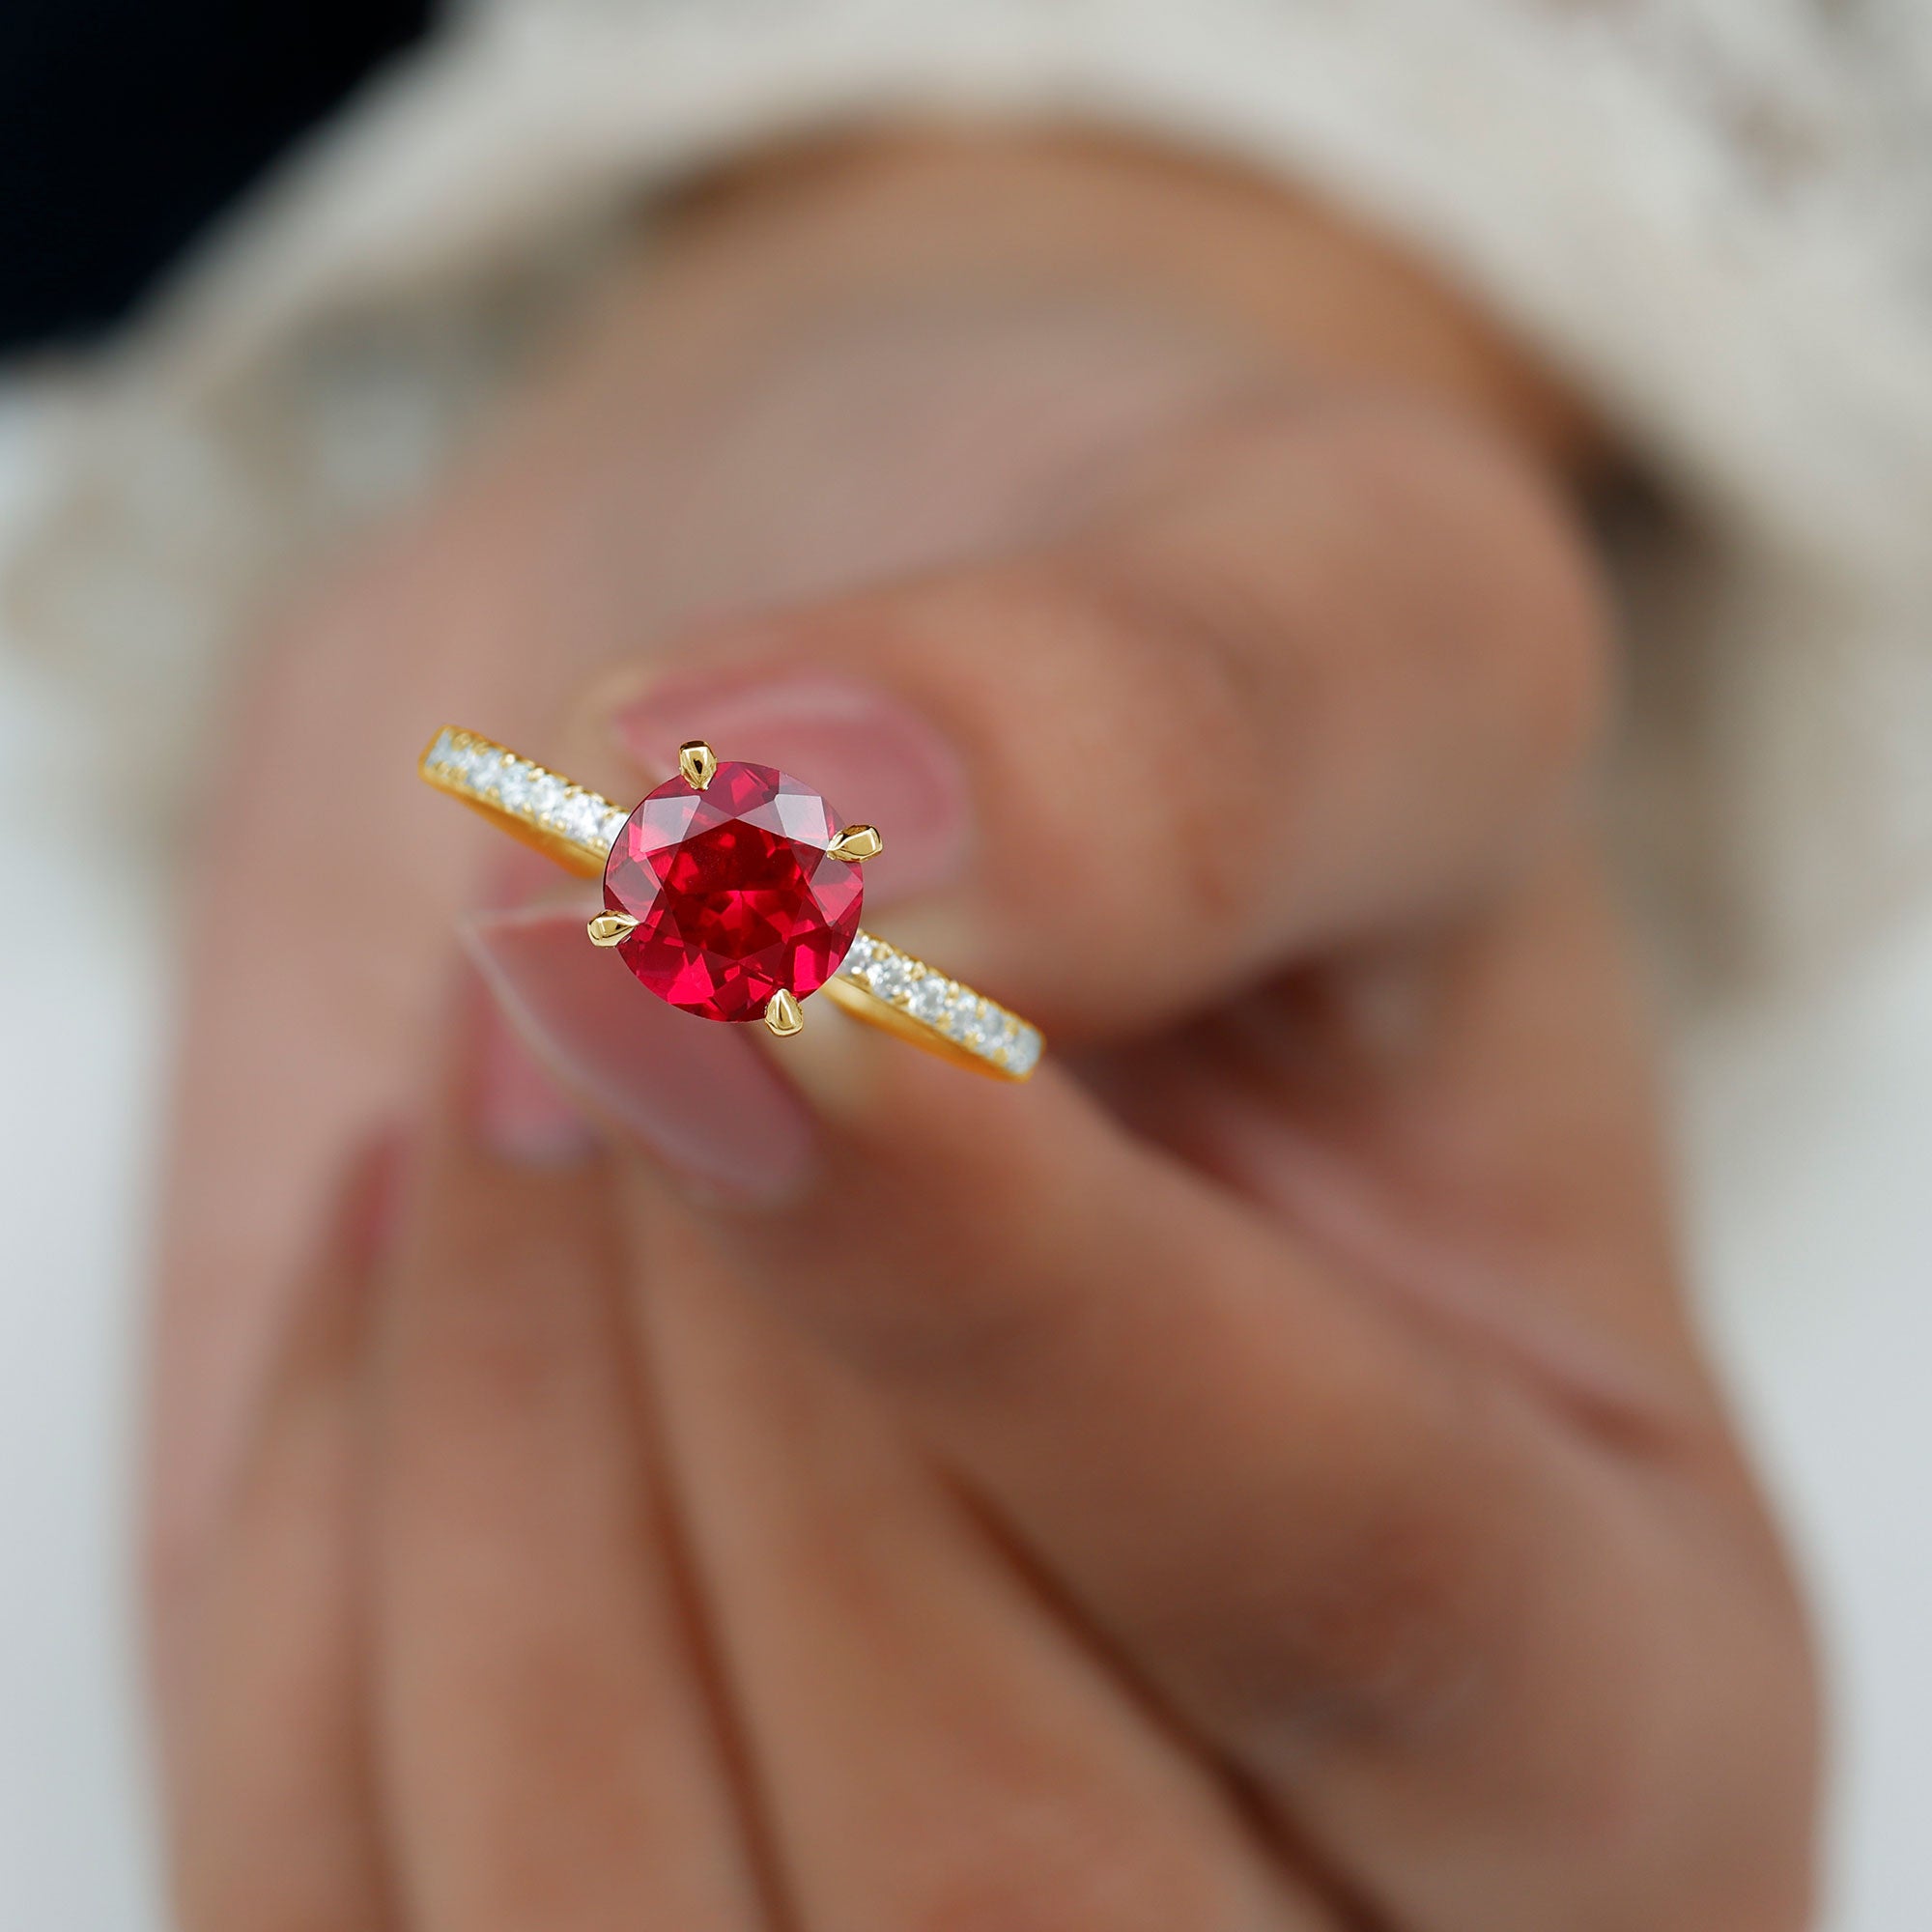 Peg Head Set Lab Grown Ruby Solitaire Engagement Ring Lab Created Ruby - ( AAAA ) - Quality - Rosec Jewels